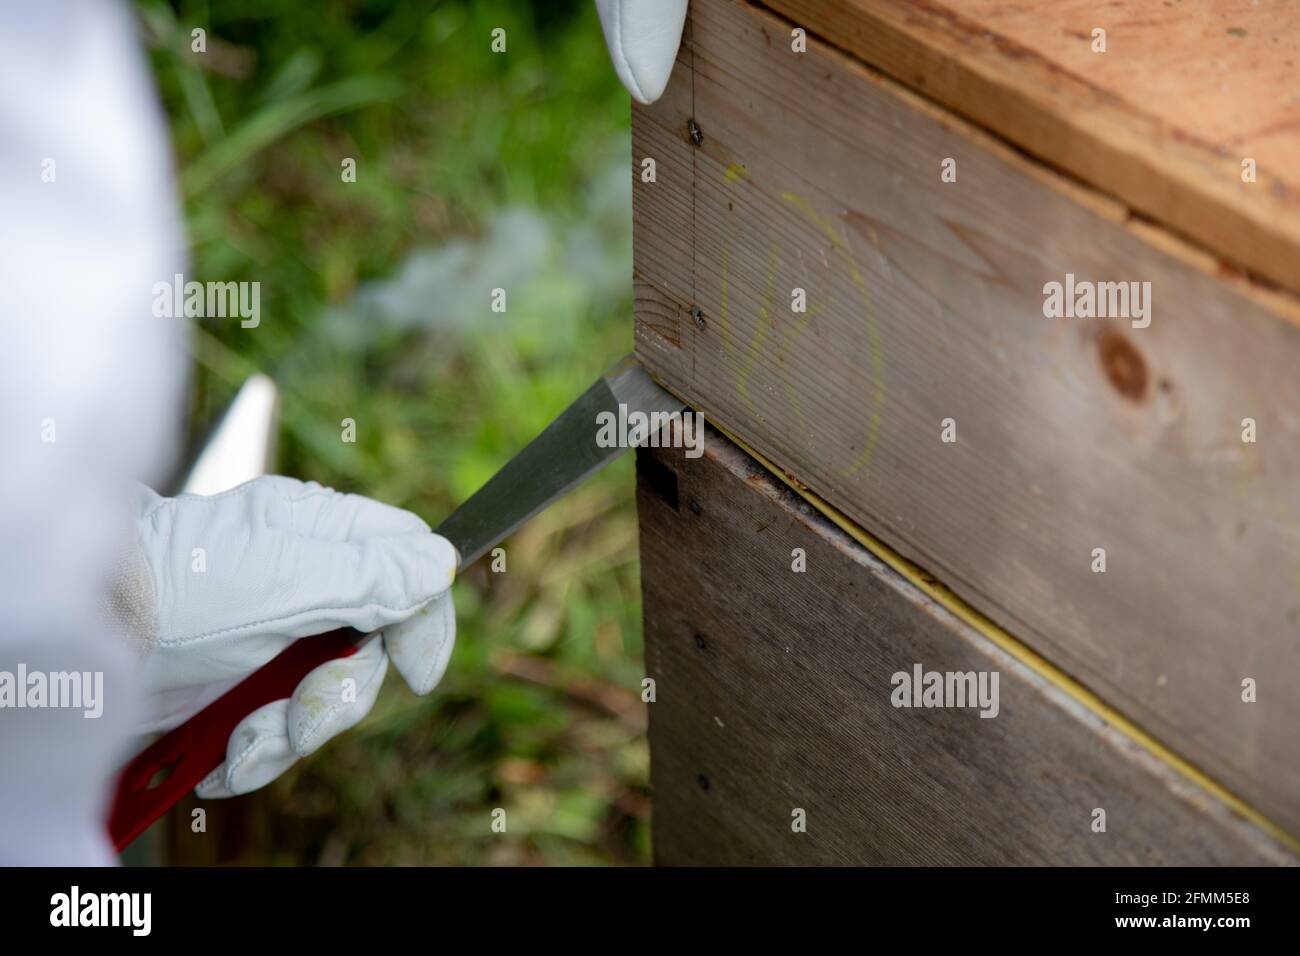 Using a hive tool to open a bee hive Stock Photo